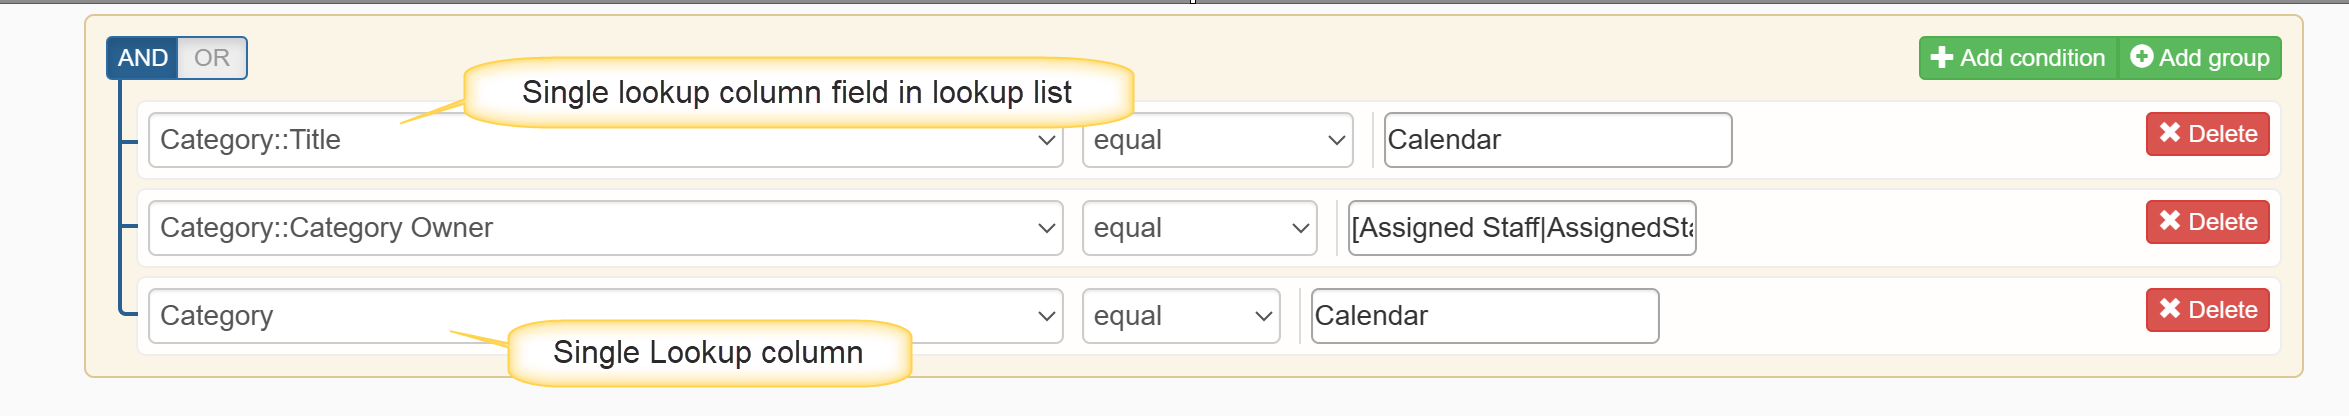 single lookup column in workflow condition